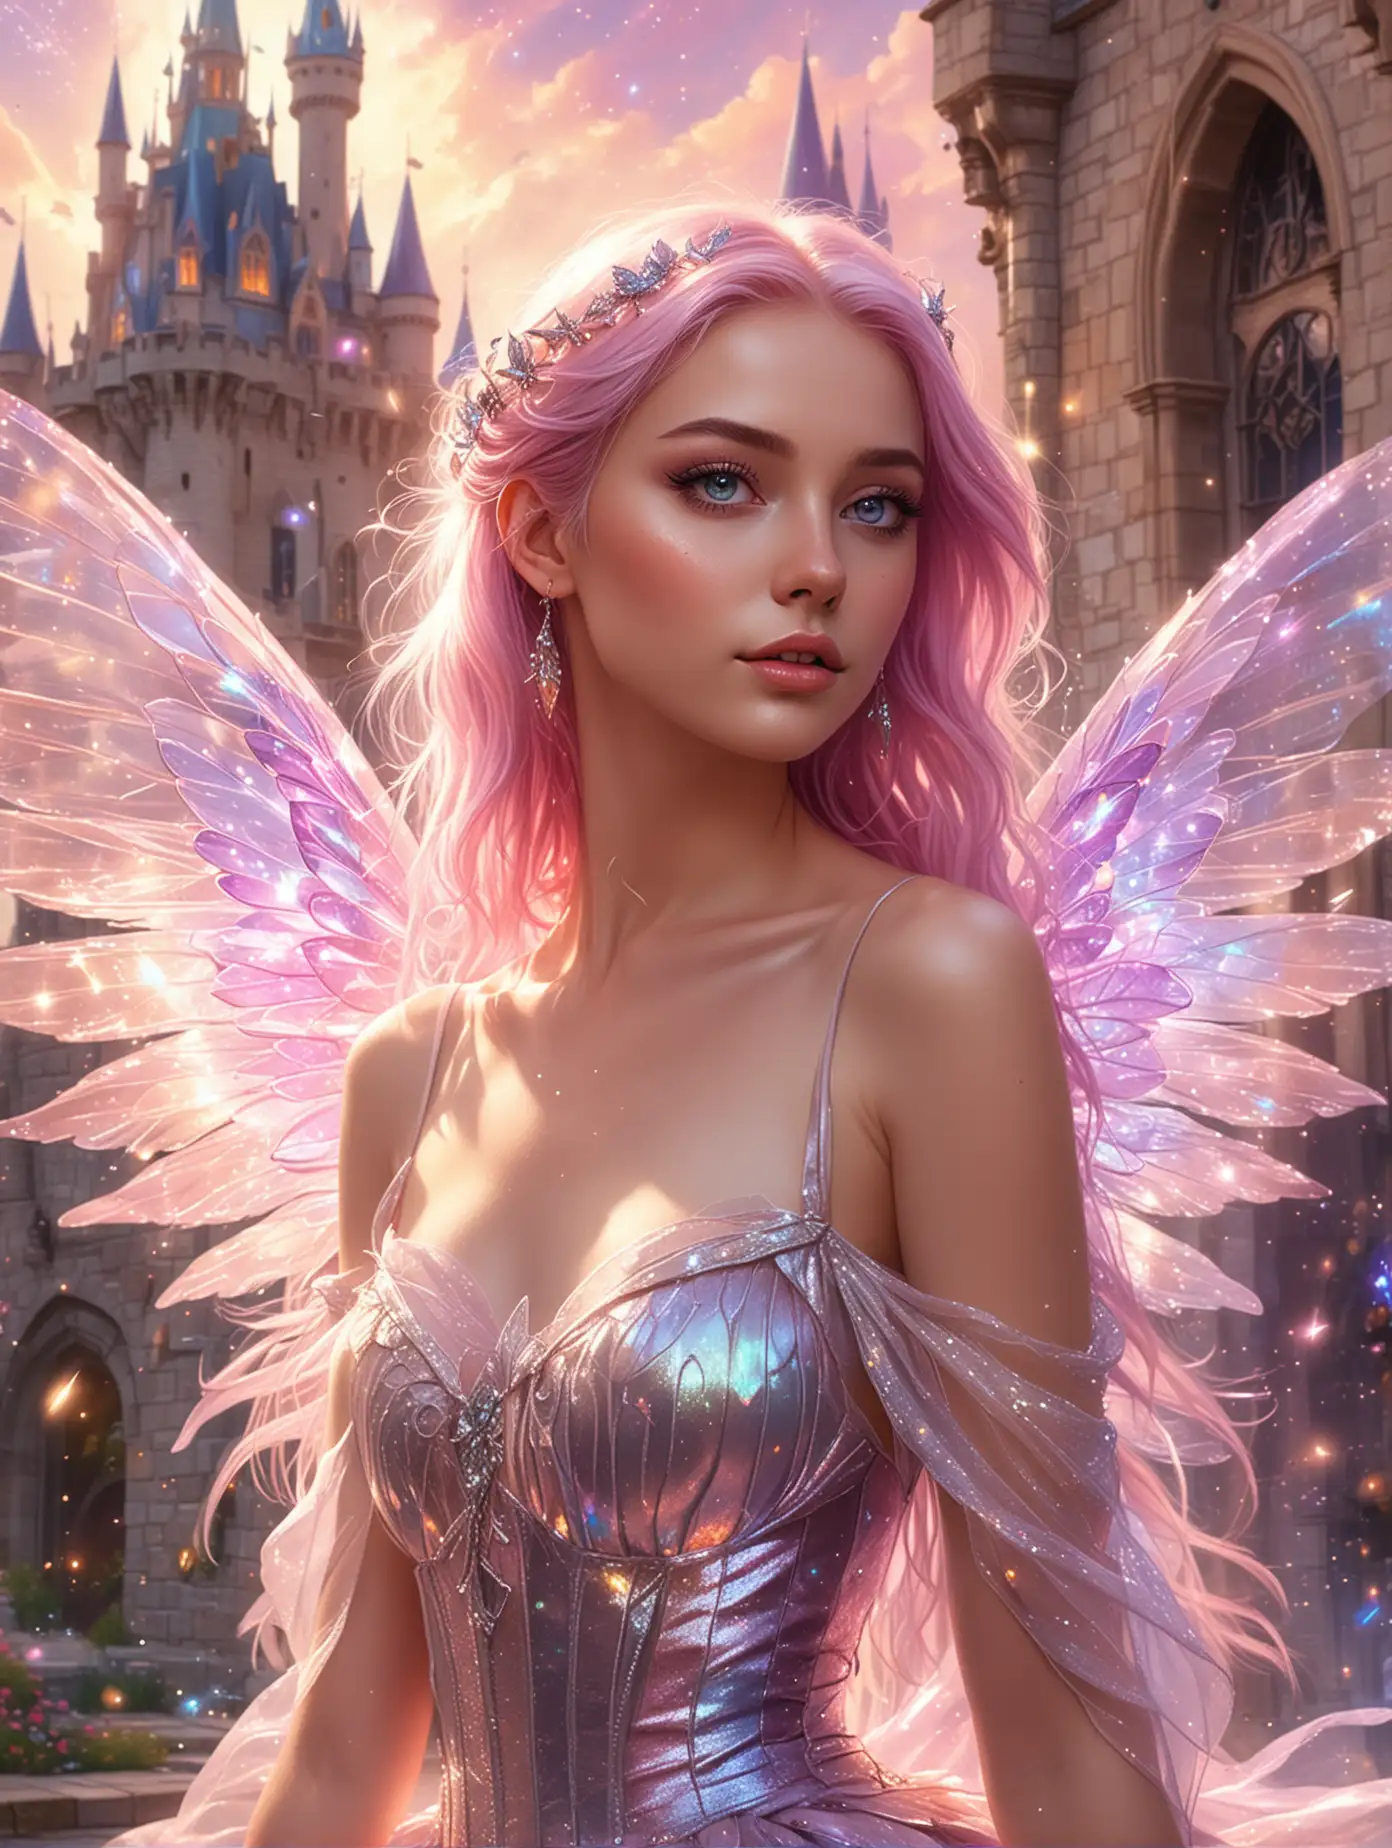 Illustration of a beautiful woman fairy, she has purple eyes, pink hair, shimmering make up, iridescent dress, cinched waist, with big iridescent gossamer wings, there's a fairytale castle in the background, rainbow, sparks and magic all around, up close portrait